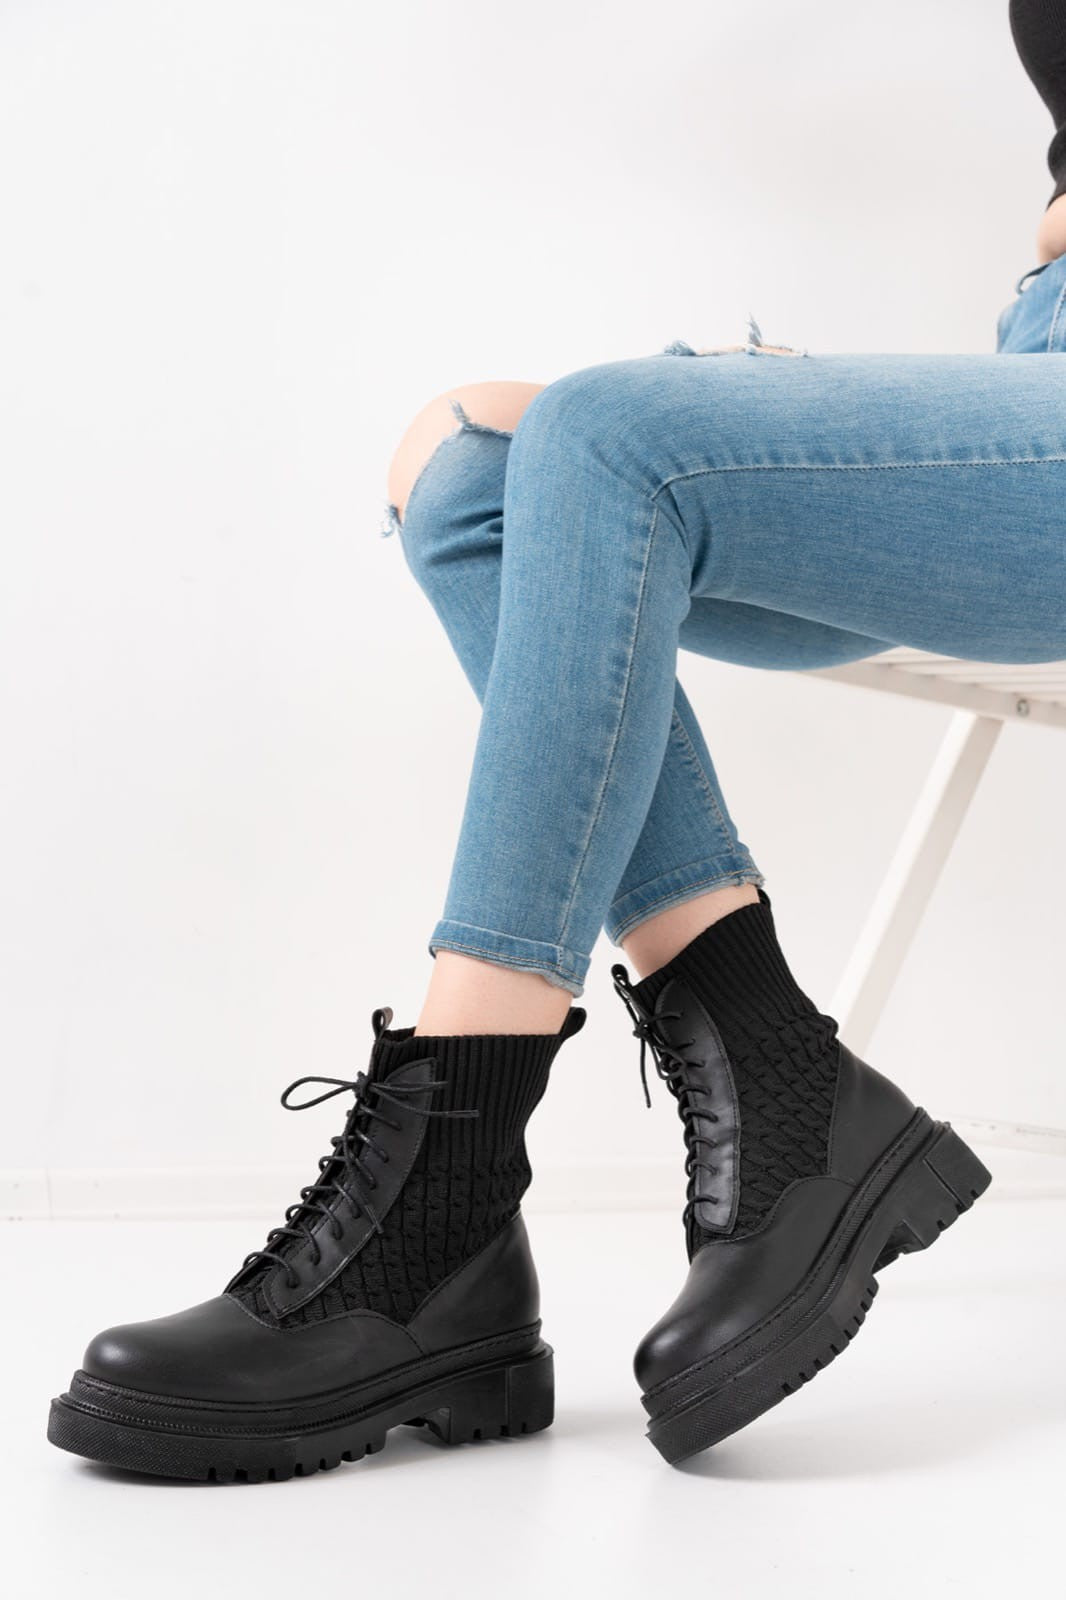 Women's Utag Black Skin Lace Up Boots - STREETMODE ™